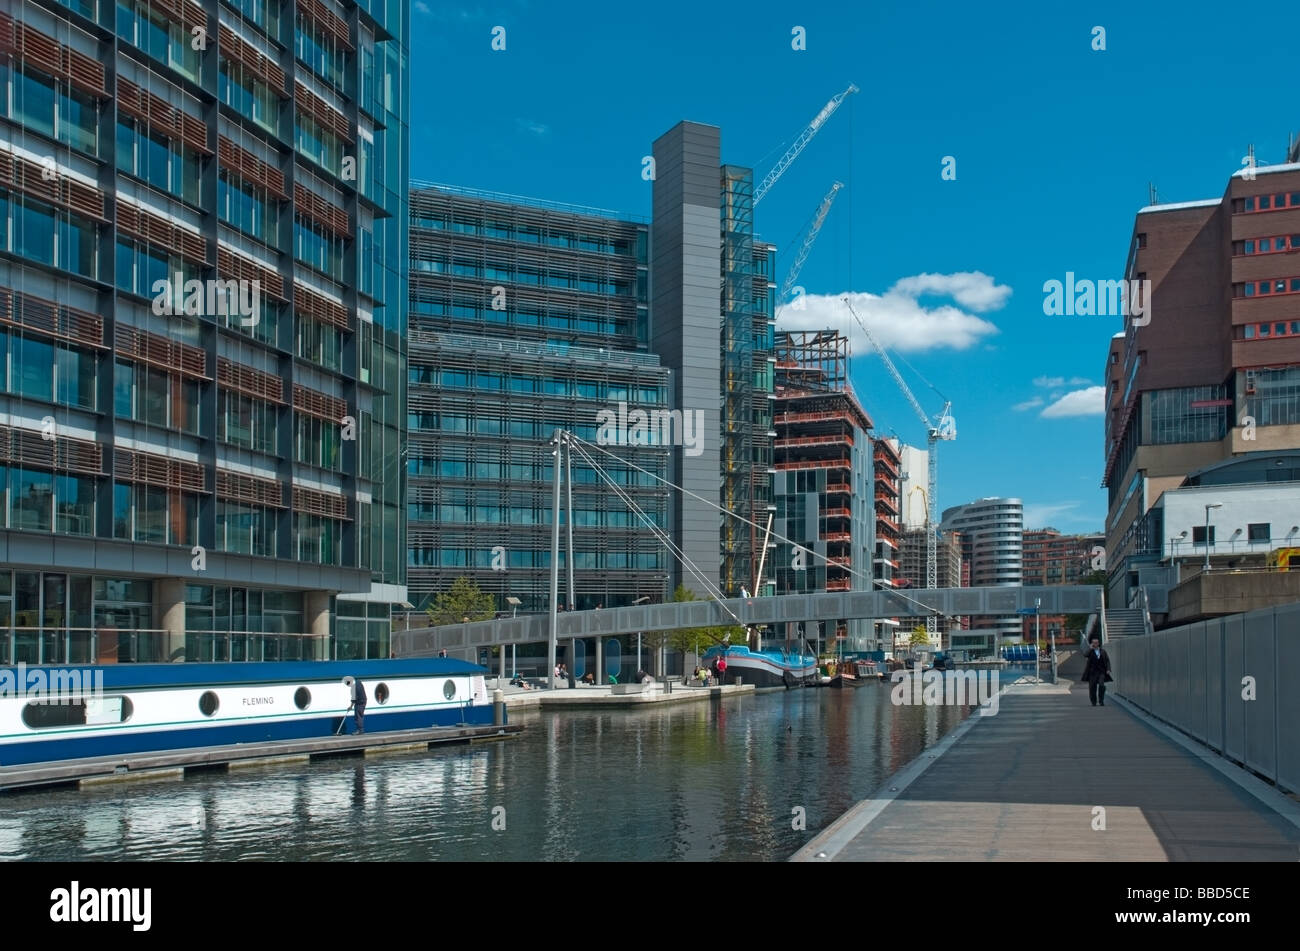 Paddington Basin on the Grand Union Canal in West London, now surrounded by modern office blocks Stock Photo